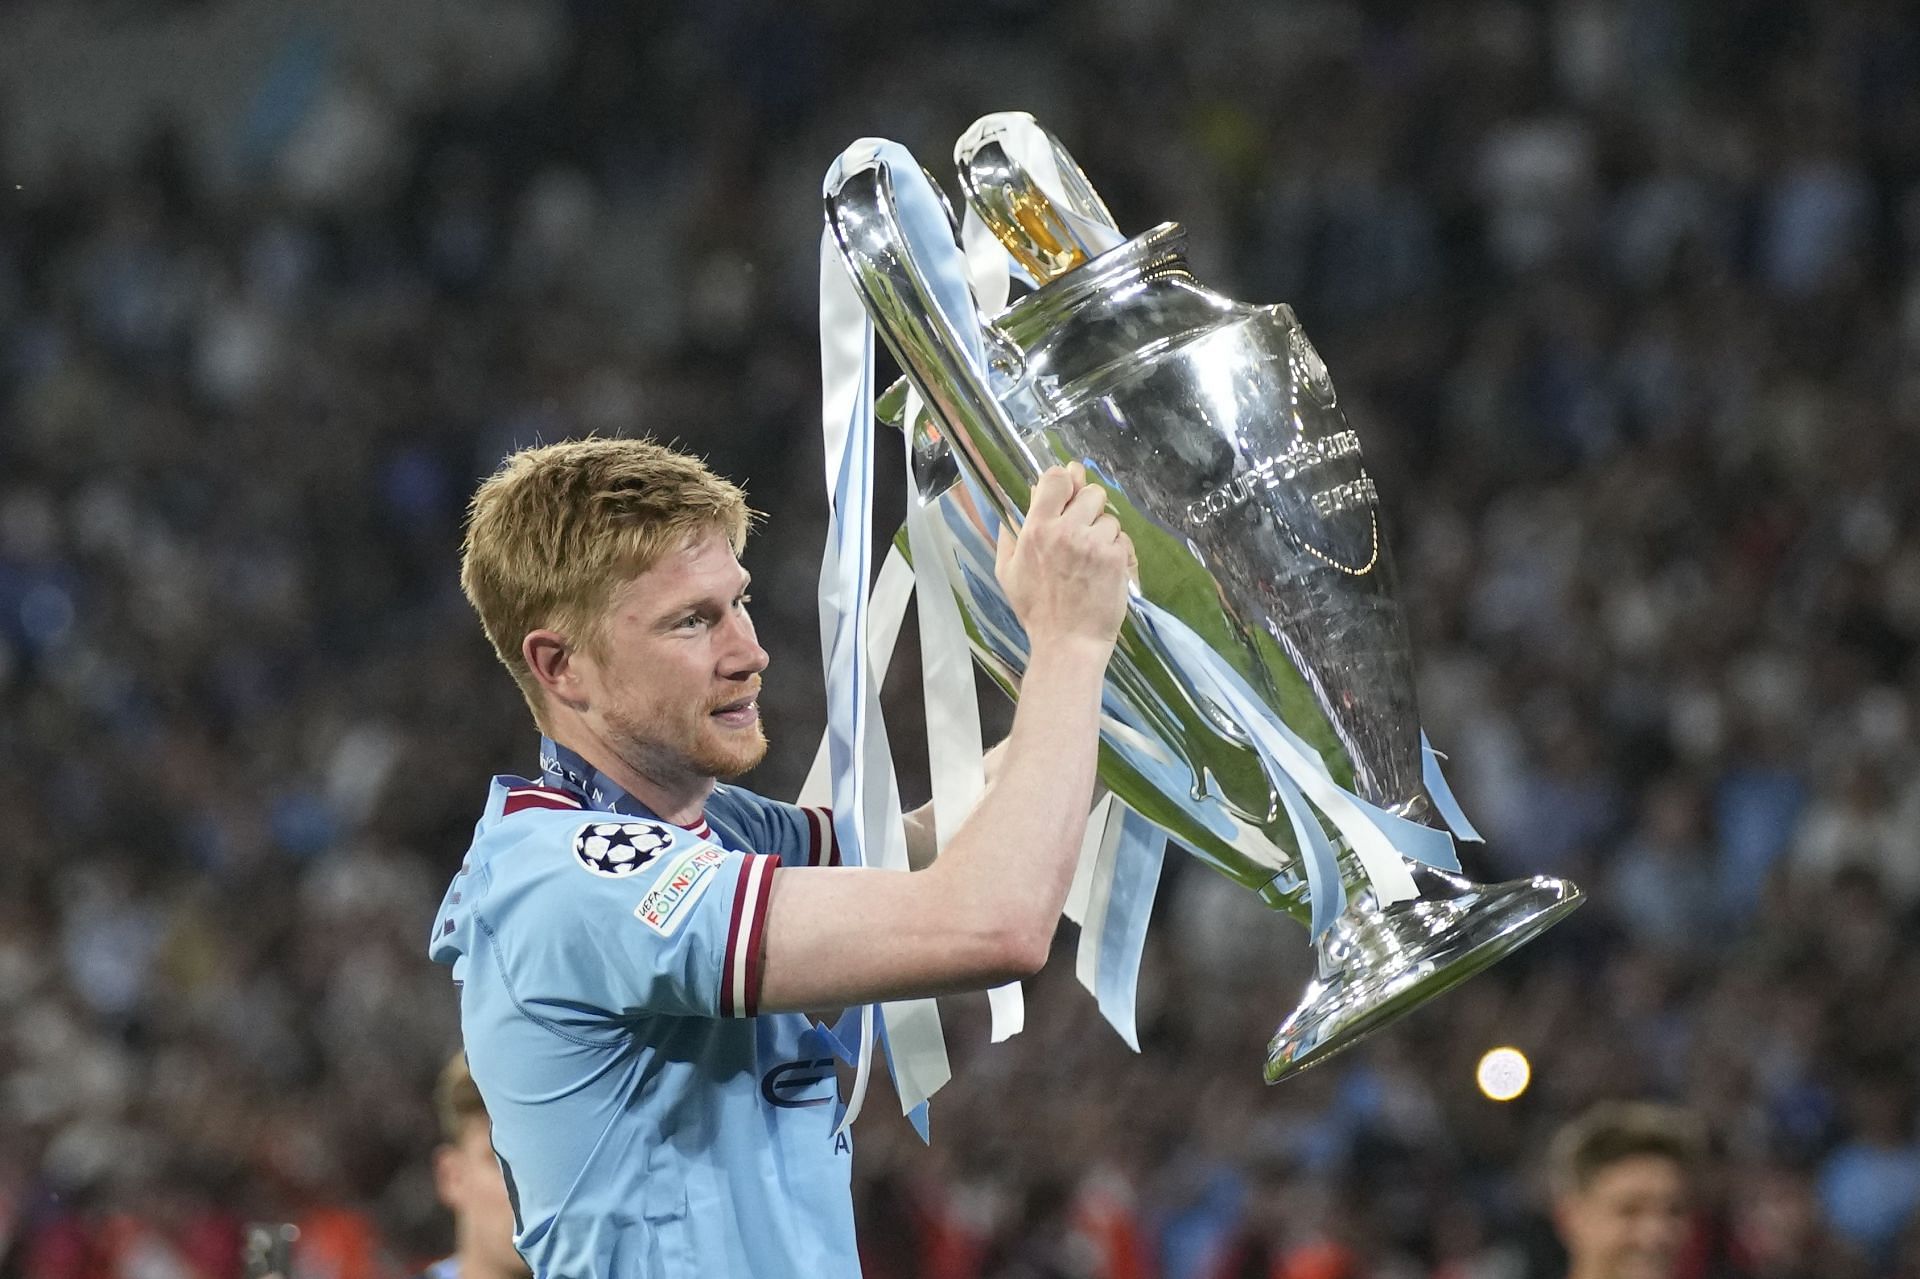 Kevin De Bruyne poses with the Champions League trophy